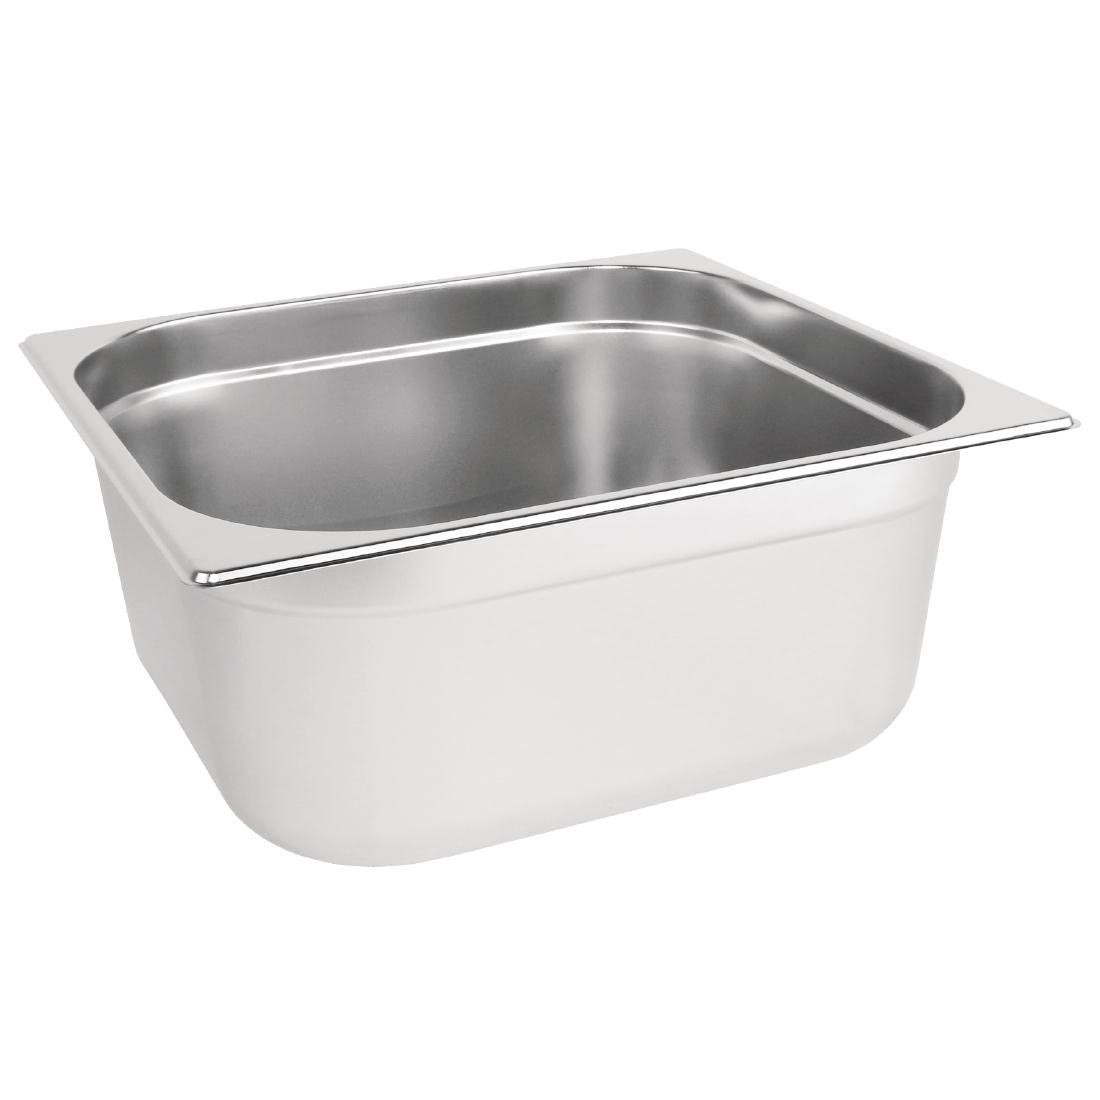  Ǔ Vogue Stainless Steel 2/3 Gastronorm Tray 150mm